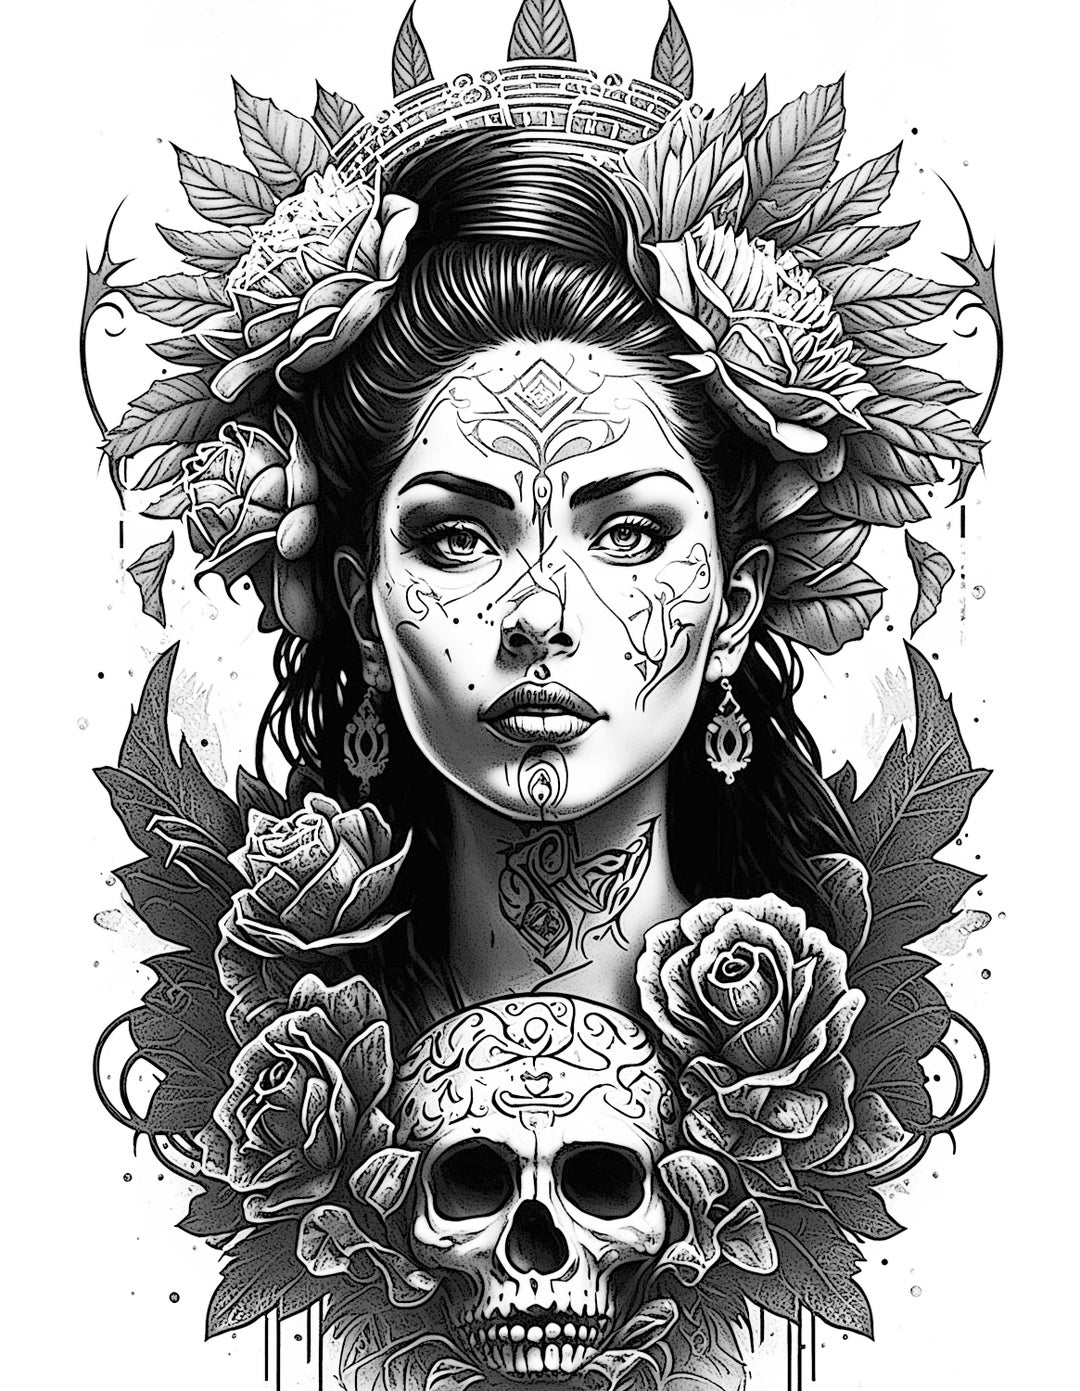 Xicana Rose Queen Coloring Page, Adult Coloring Sheet of the Face of a ...